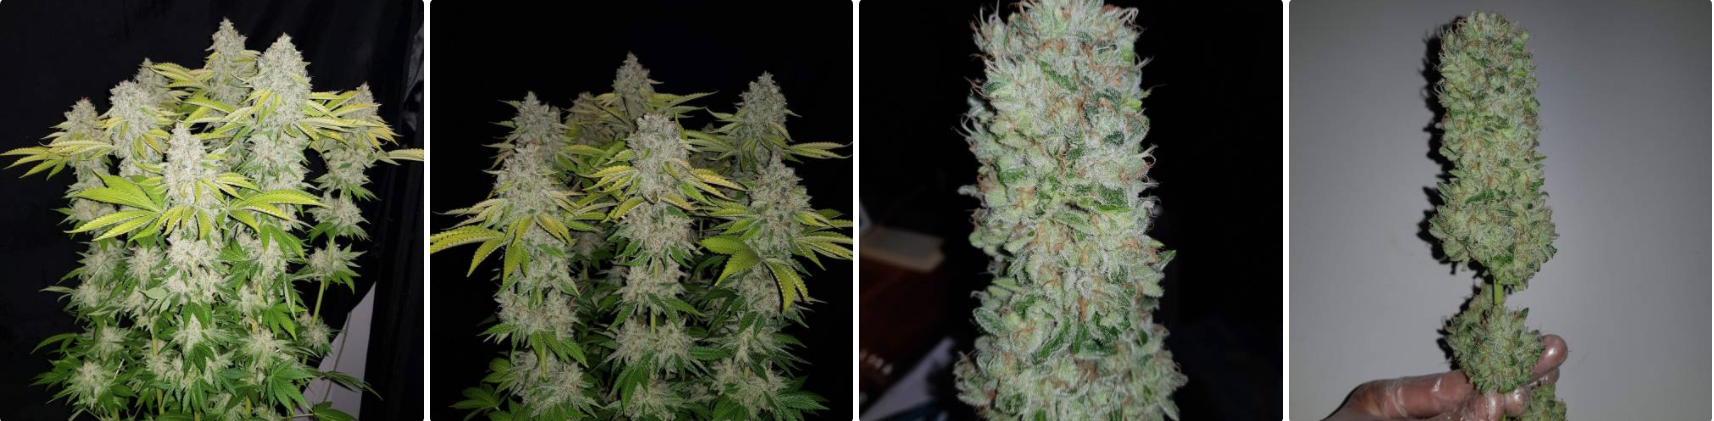 Remo Chemo Grow Diaries Crop